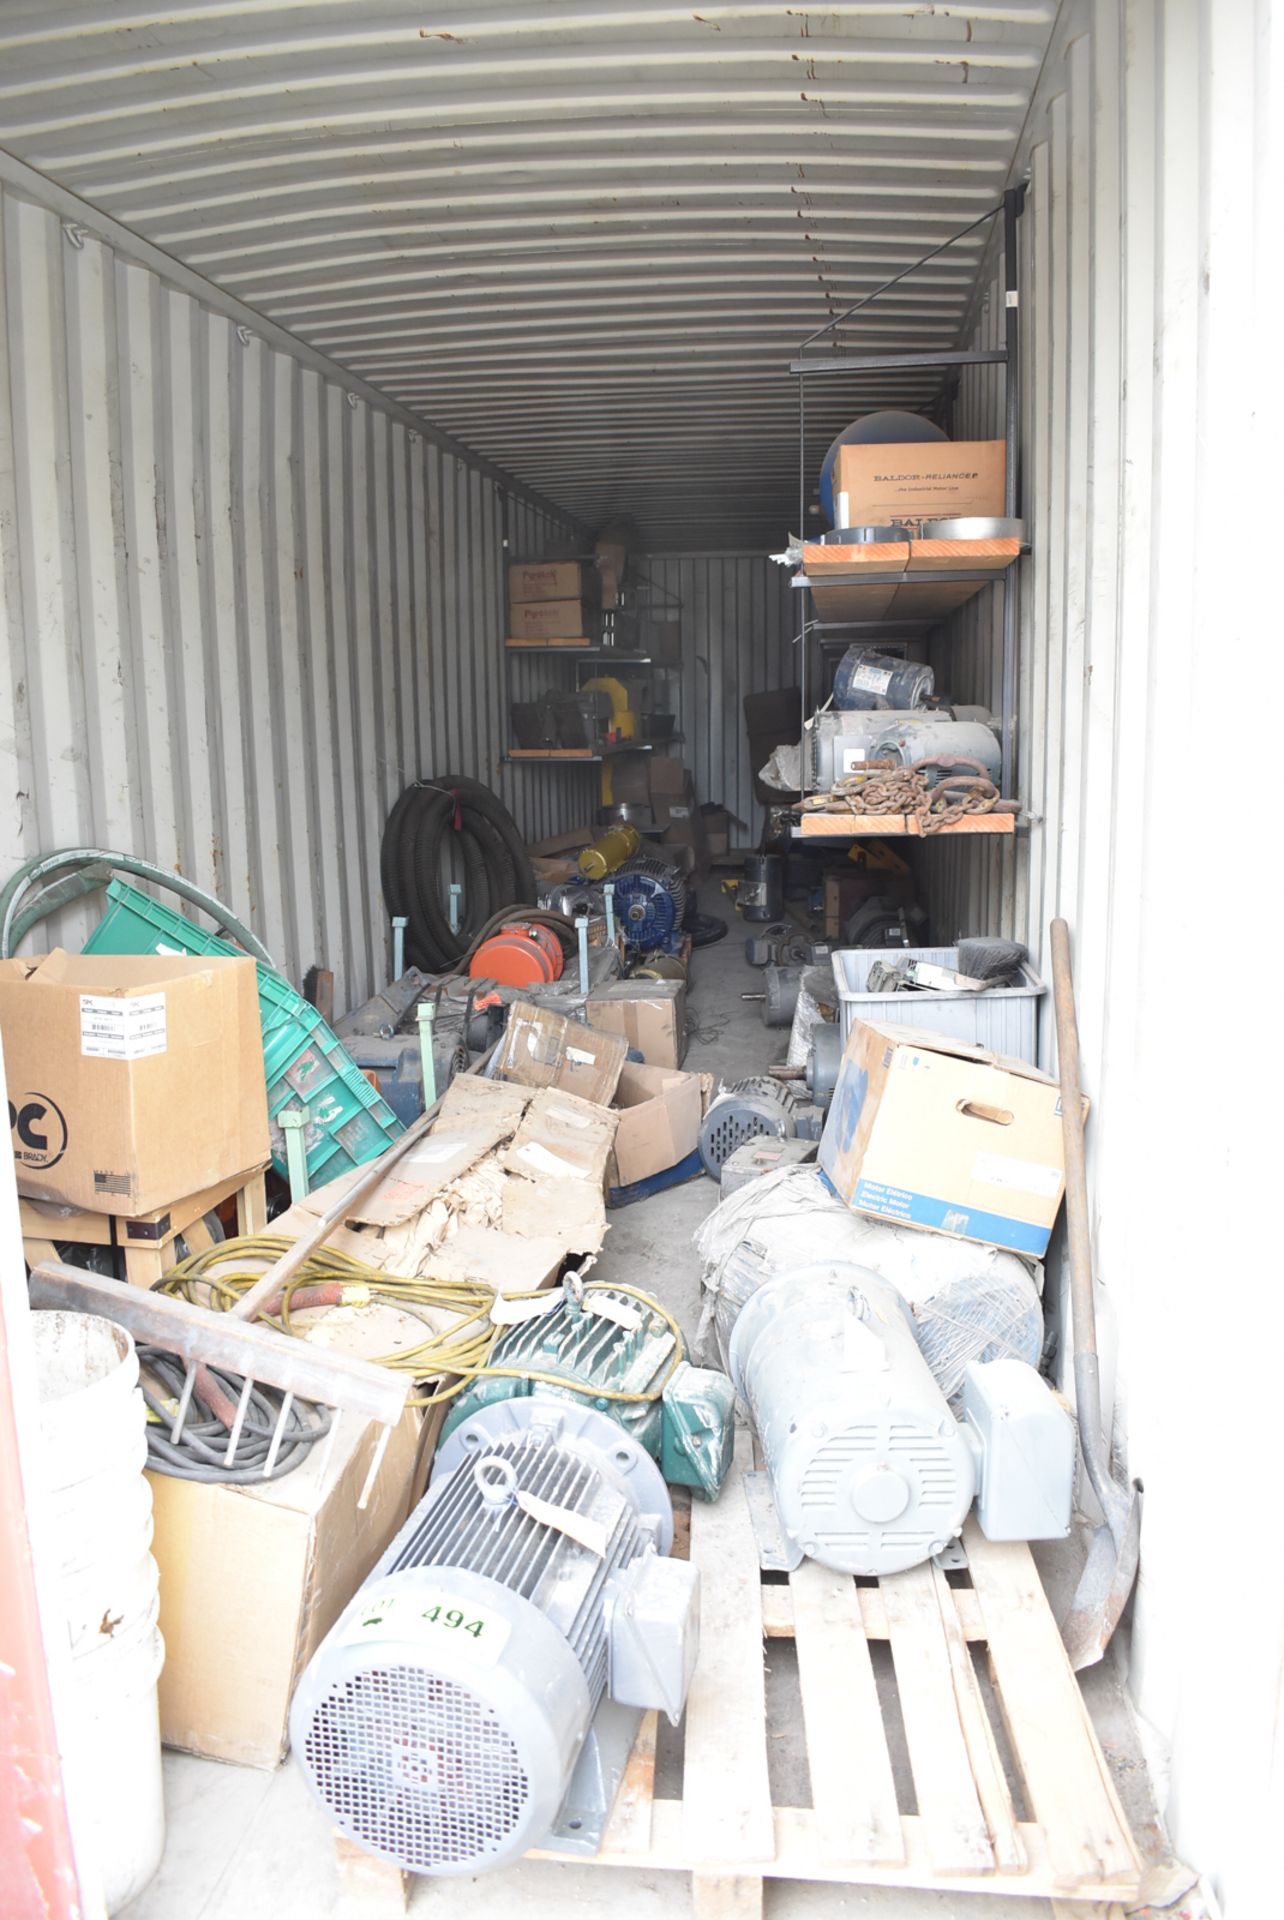 LOT/ CONTENTS OF SEA CONTAINER - SPARE MOTORS, GEARBOXES, PYROTEK DIE CASTING SUPPLIES, AIR TANK,